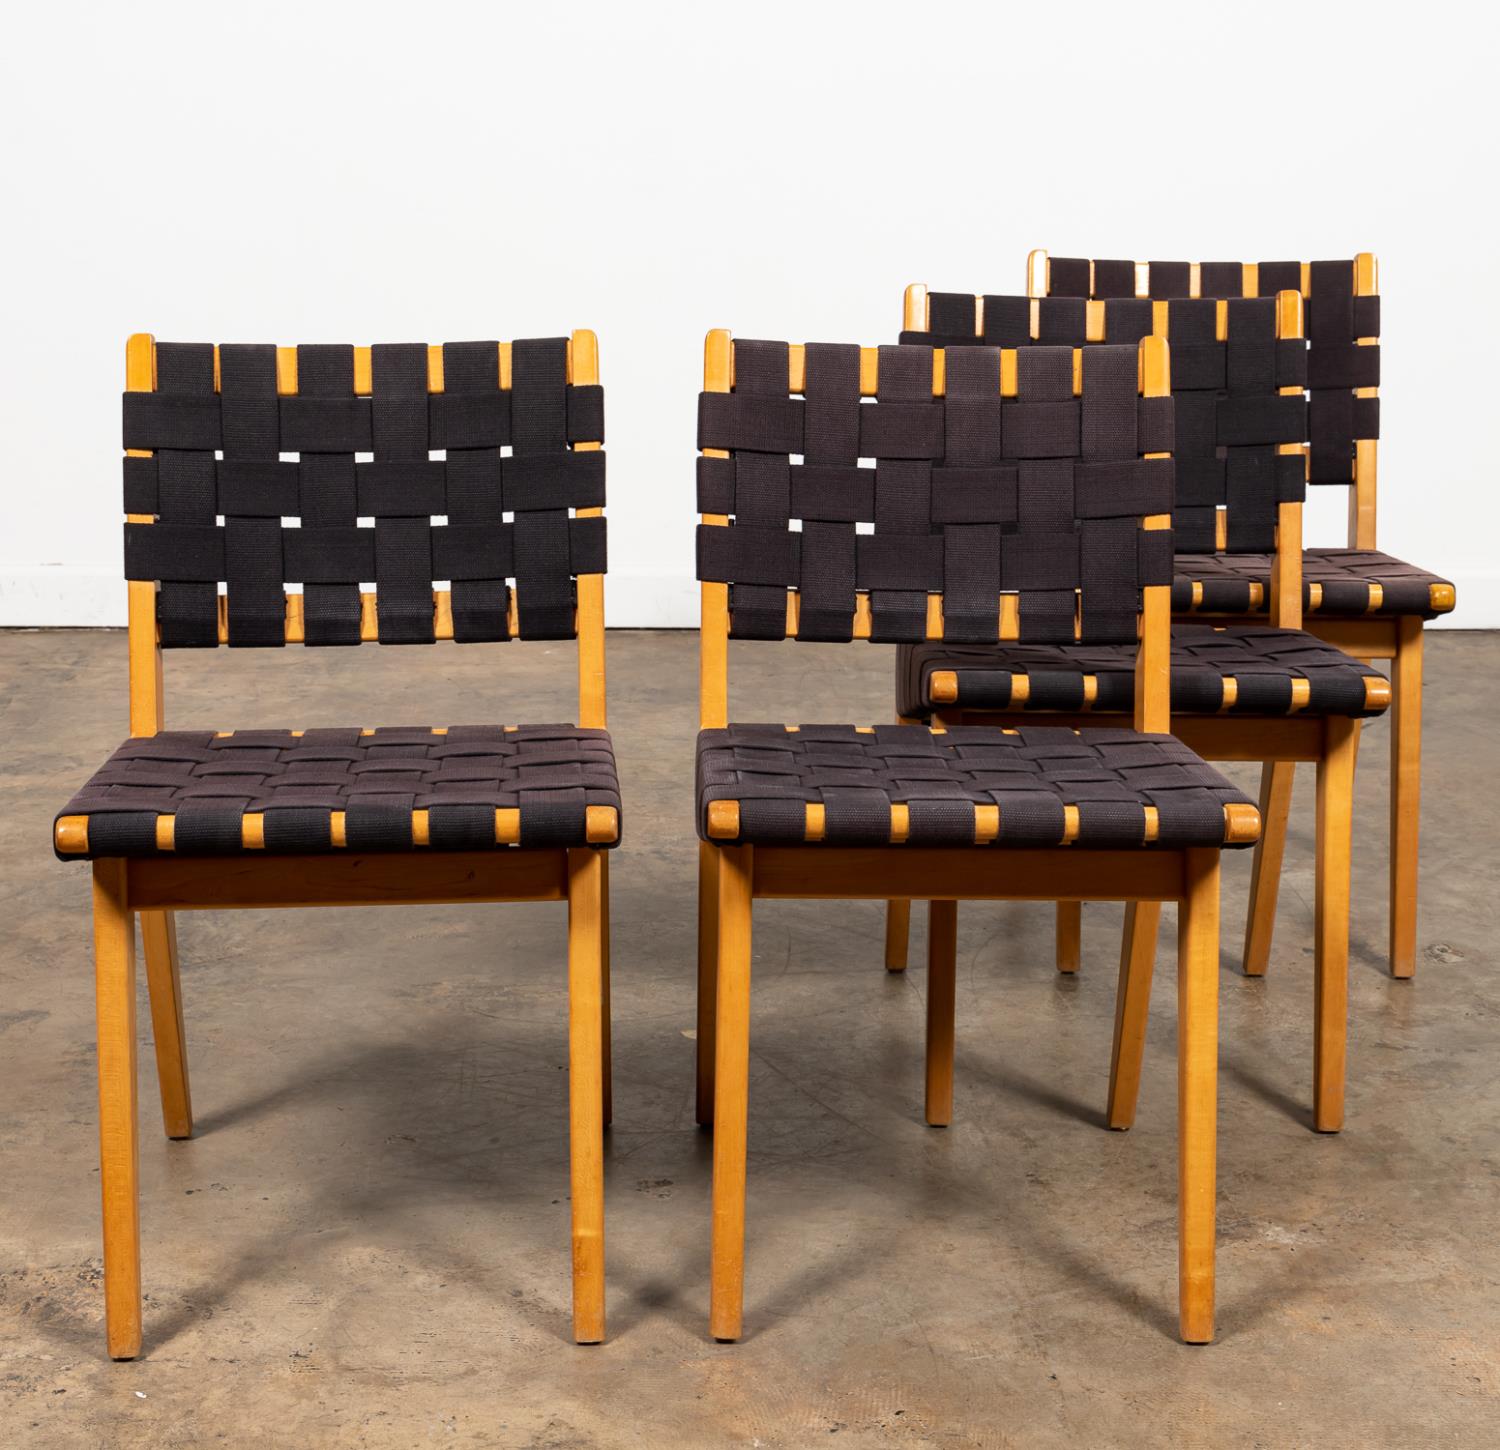 4 JENS RISOM FOR KNOLL BIRCH CHAIRS,